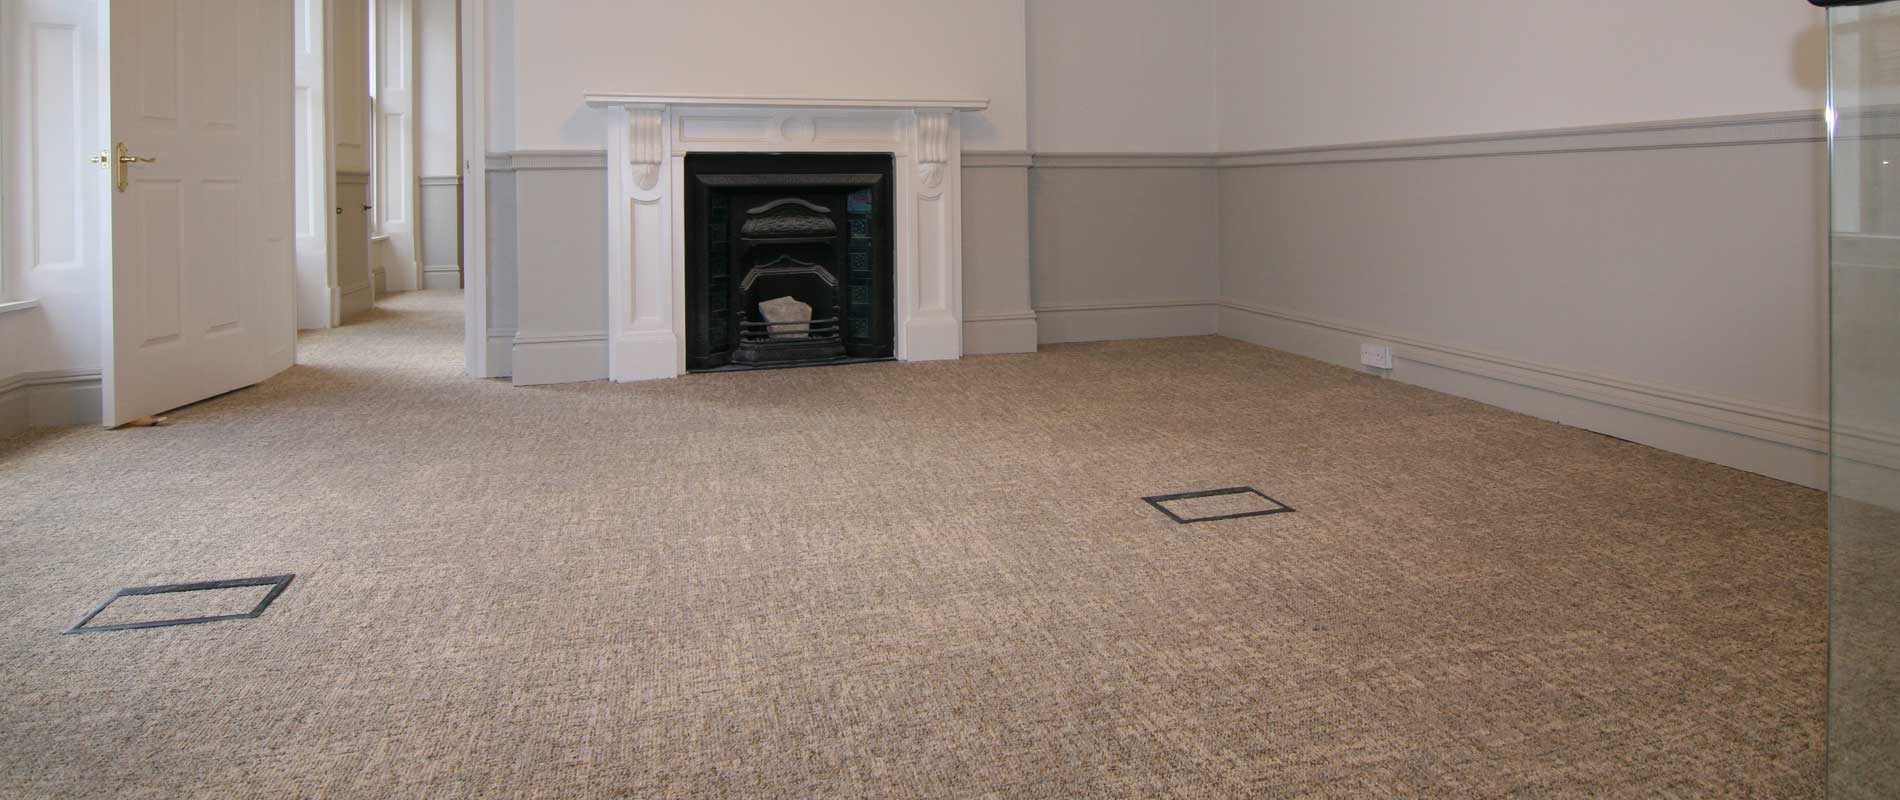 Ege Carpet Tiles fitted in a listed period office in Dover Street Mayfair by Octopus Interiors 